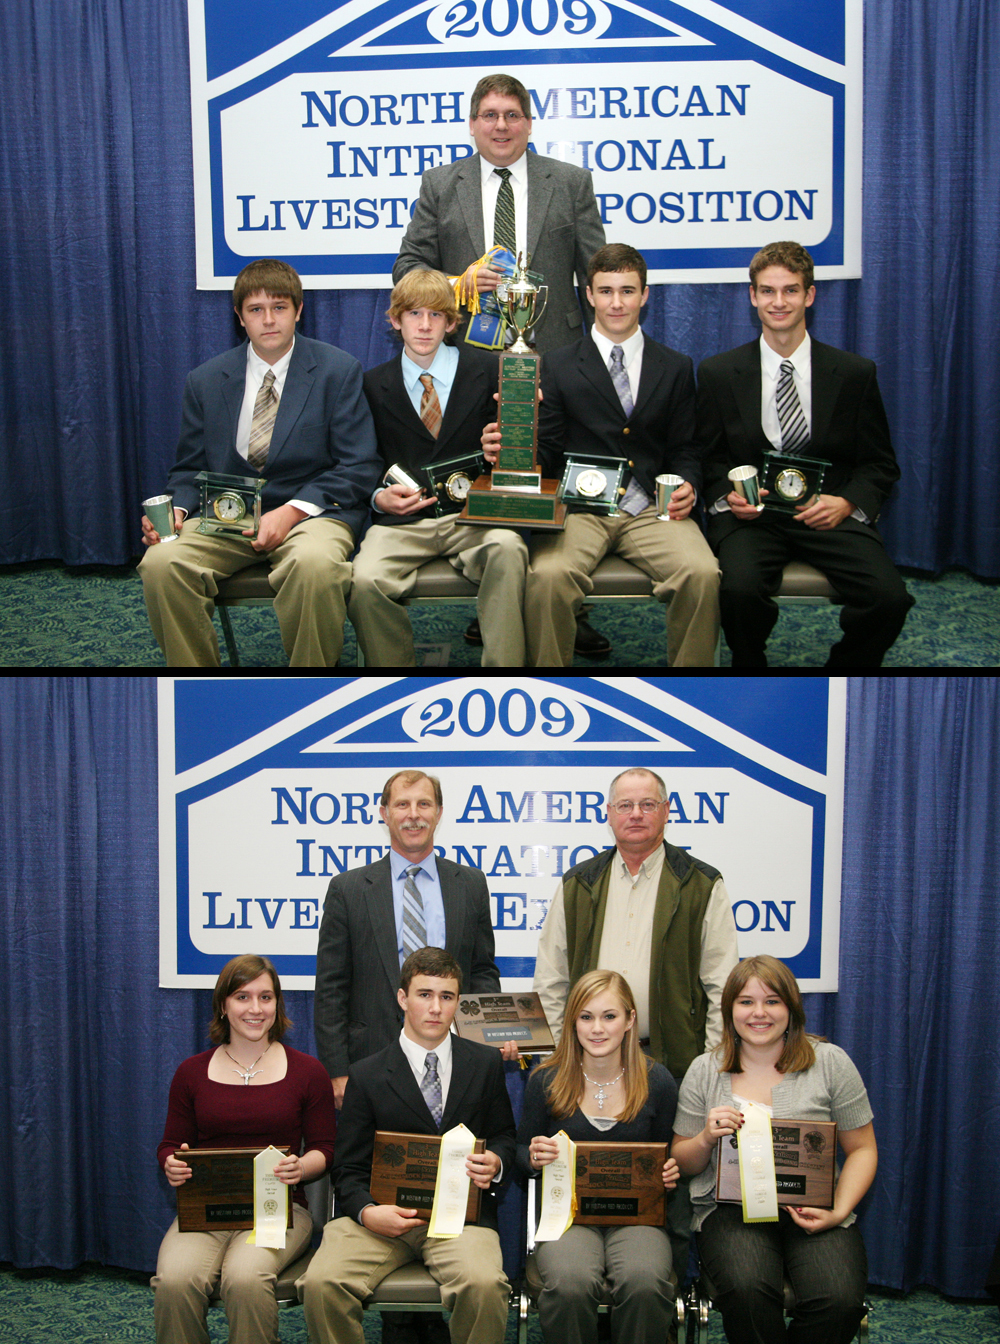 Top image Virginia 4-H Livestock Judging Team, seated left to right: Lacey Koontz, Bobby Strecker, Laura Kate Reeves, and Bly Patterson. Standing (left) Mark Wahlberg, coach, and (right) Willie Hayes of Westway Feeds sponsored the awards. Bottom image Virginia 4-H Skillathon Team, left to right: Logan Turner, Christian Deavers, Bobby Strecker, and Marshall Slaven. Standing is Eric Stogdale, coach.